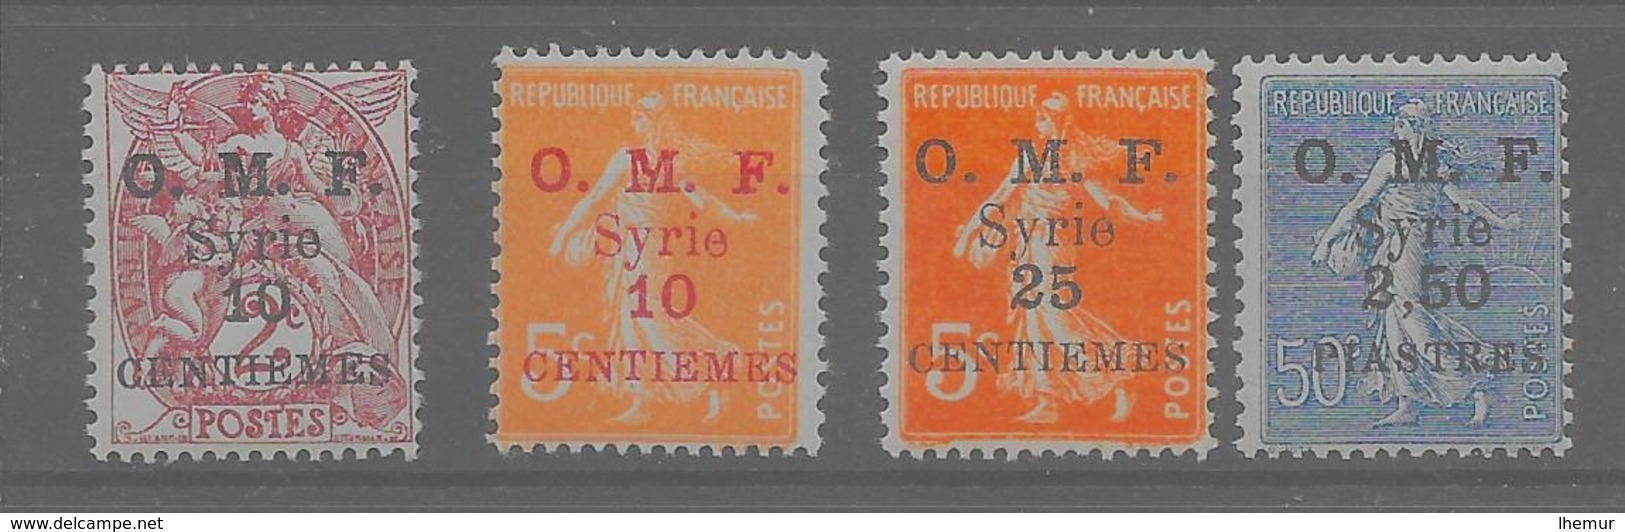 Syrie - Y Et T N° 83, 84, 85, 87,tous** (M. N. H.) - Lot De 4 - T.T.Beau - Unused Stamps